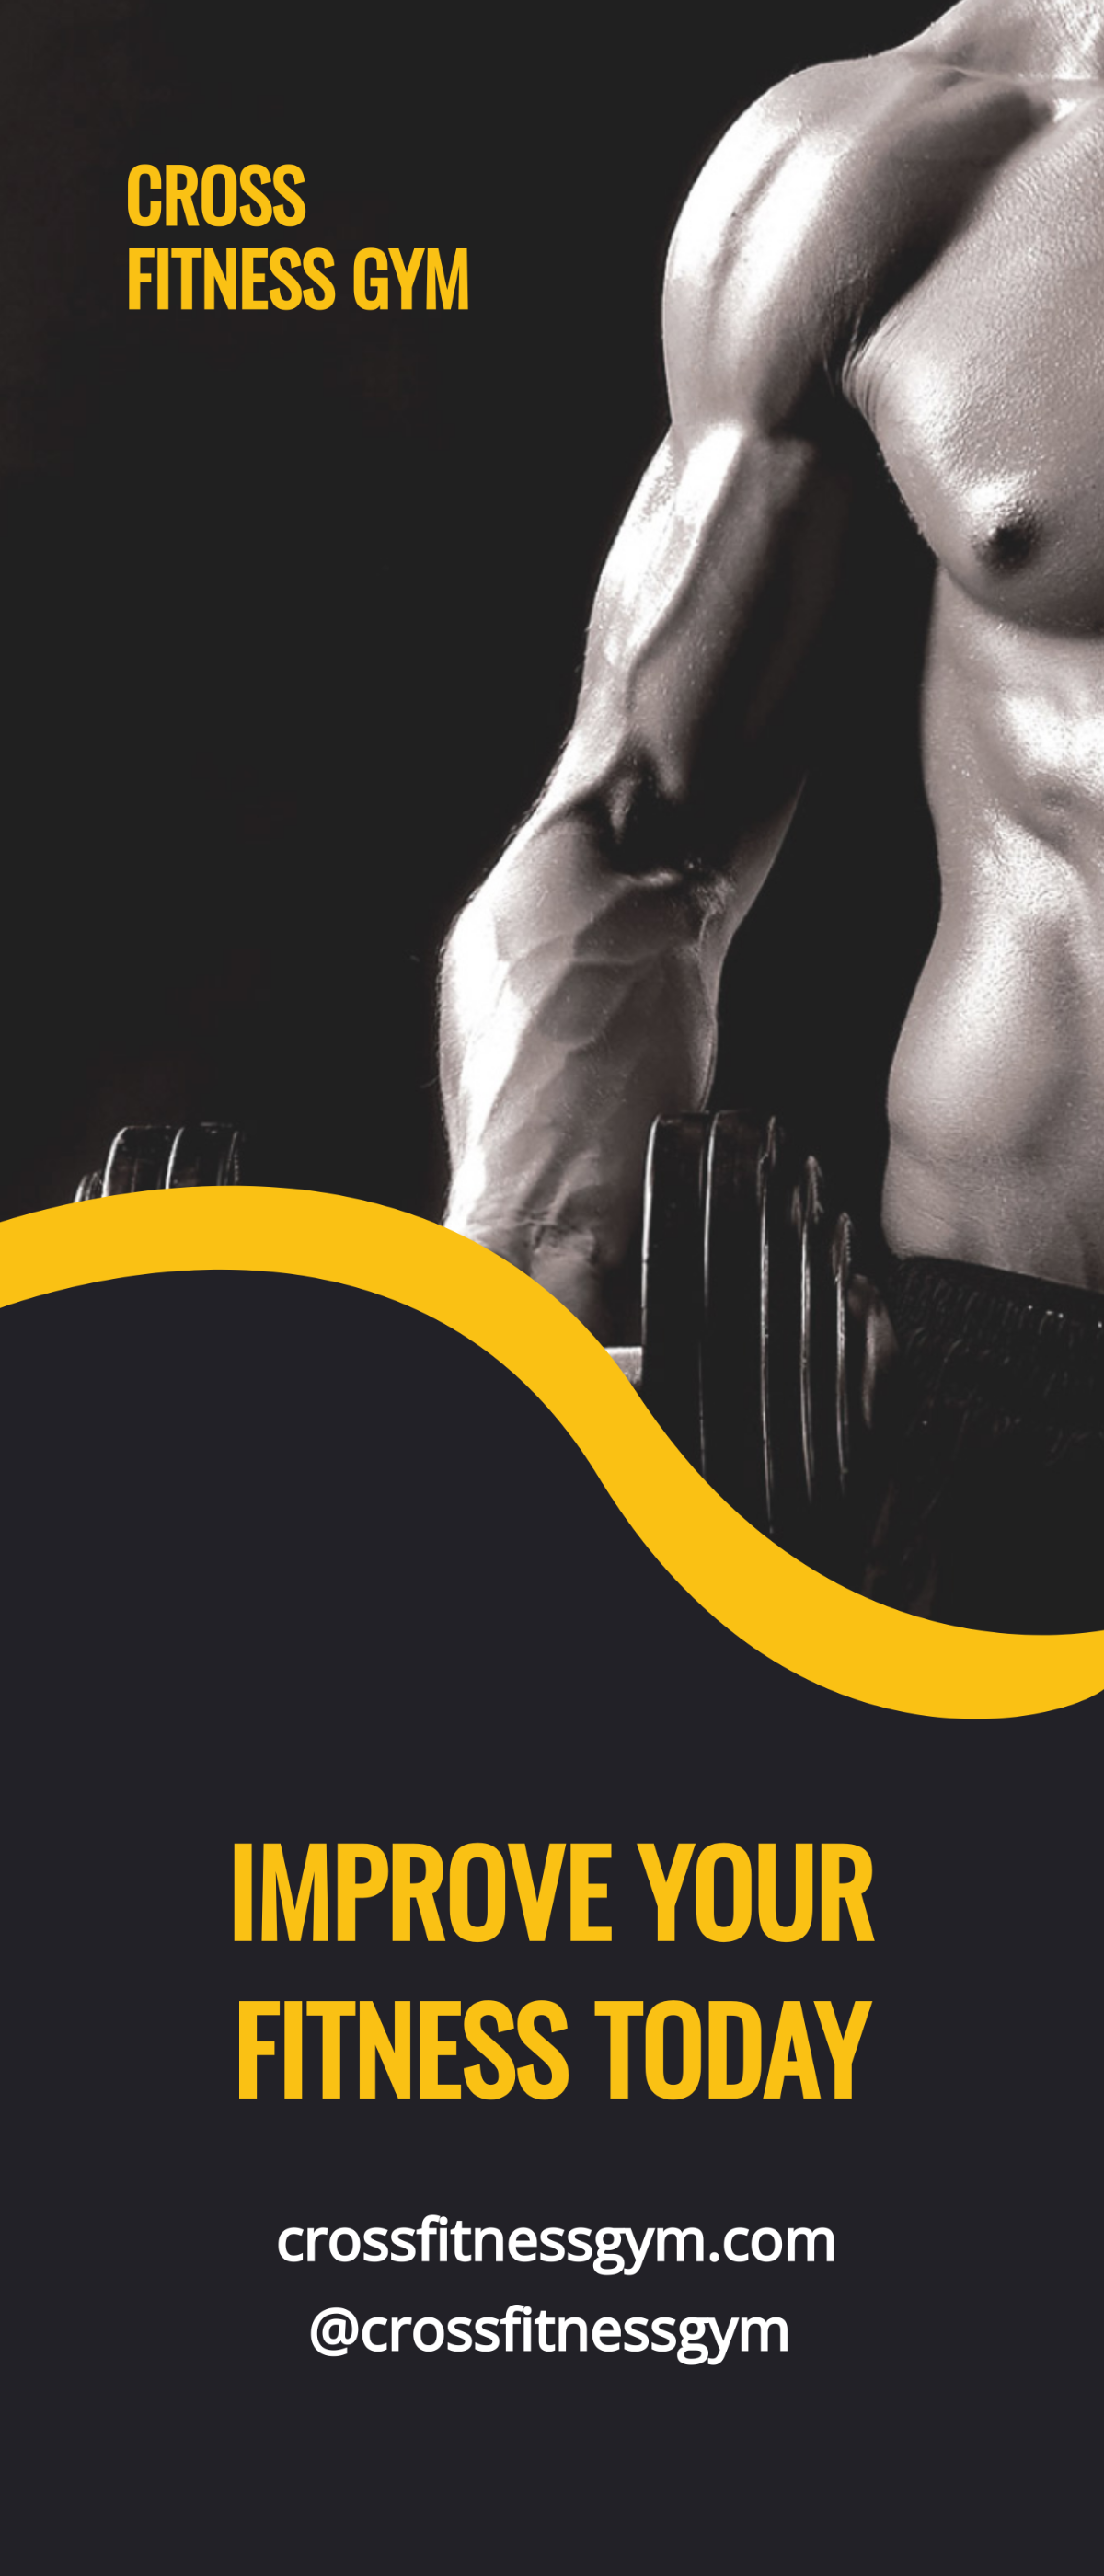 Creative Gym Roll-Up Banner Template